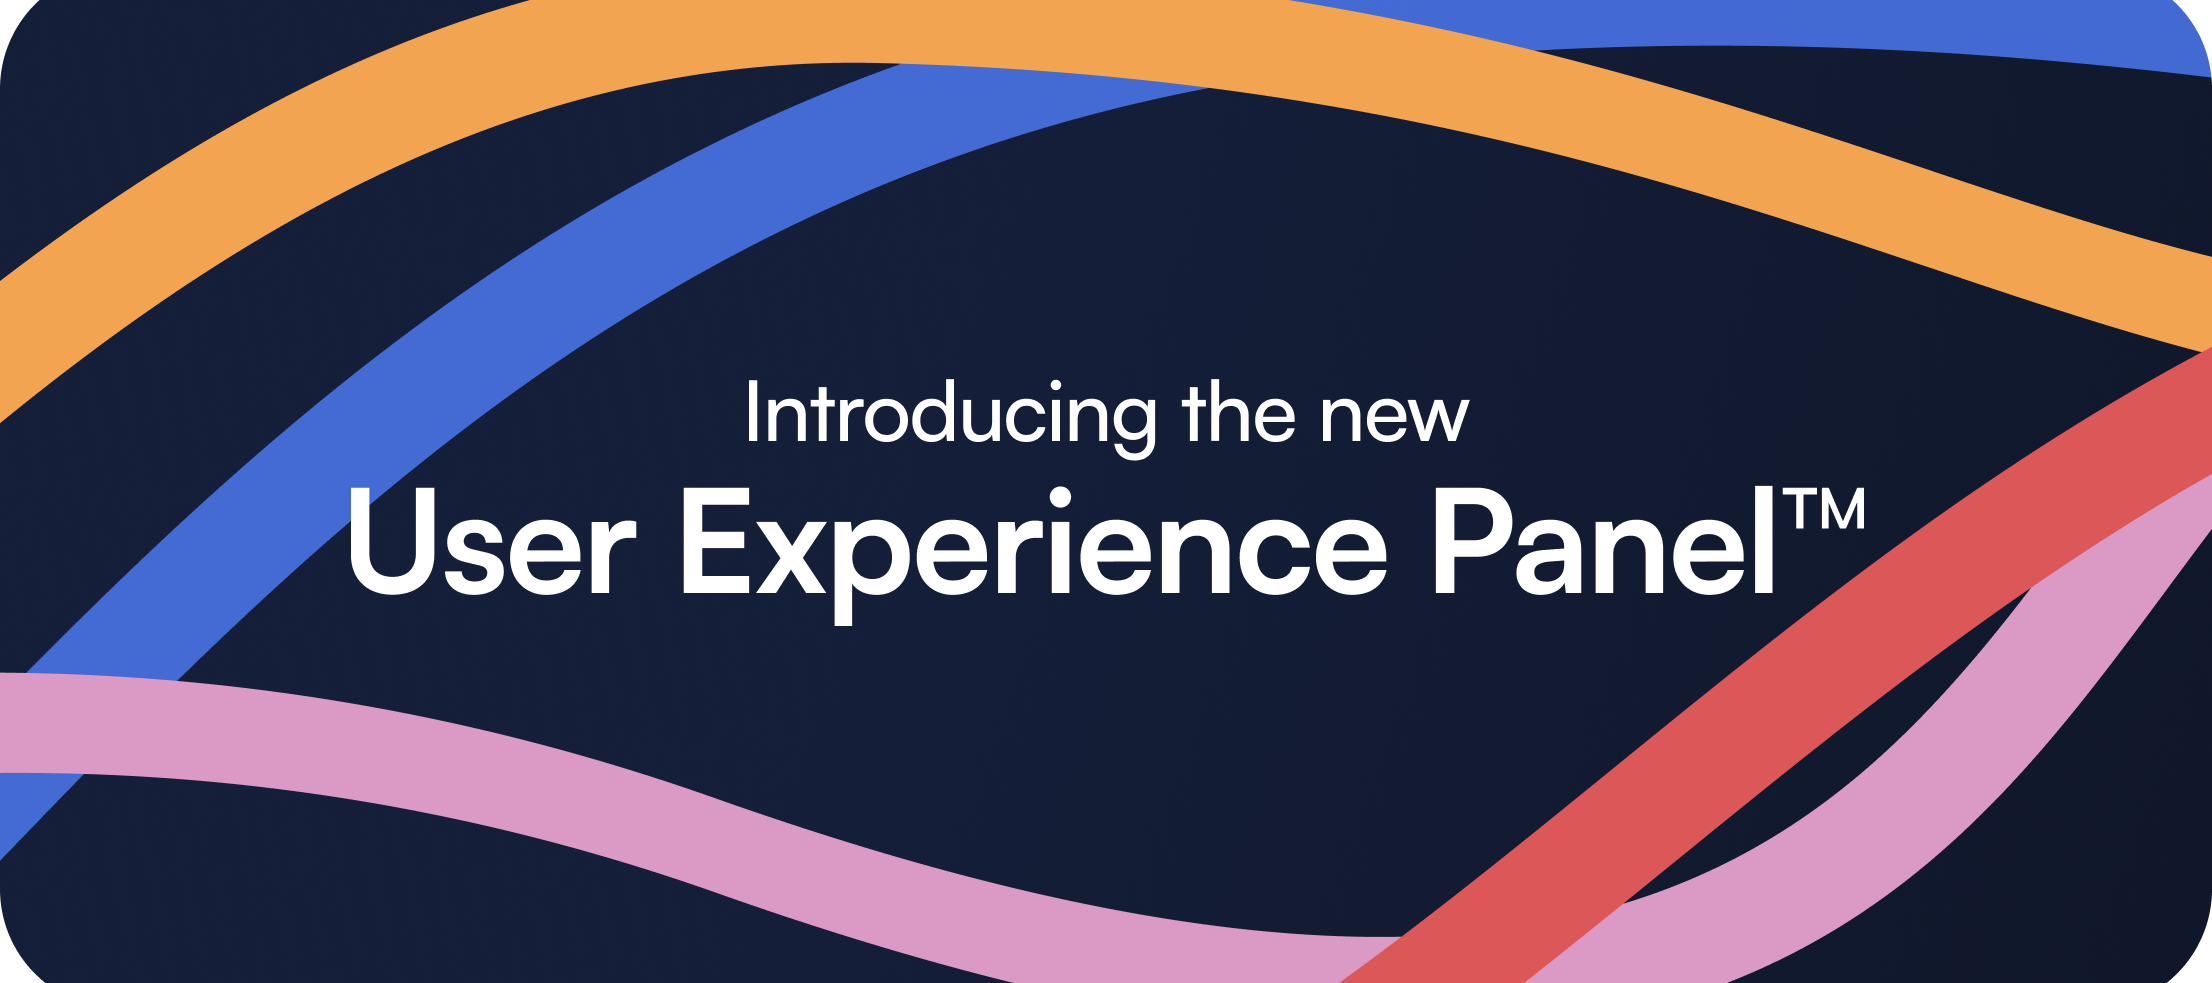 General Availability announcement for the User Experience Panel